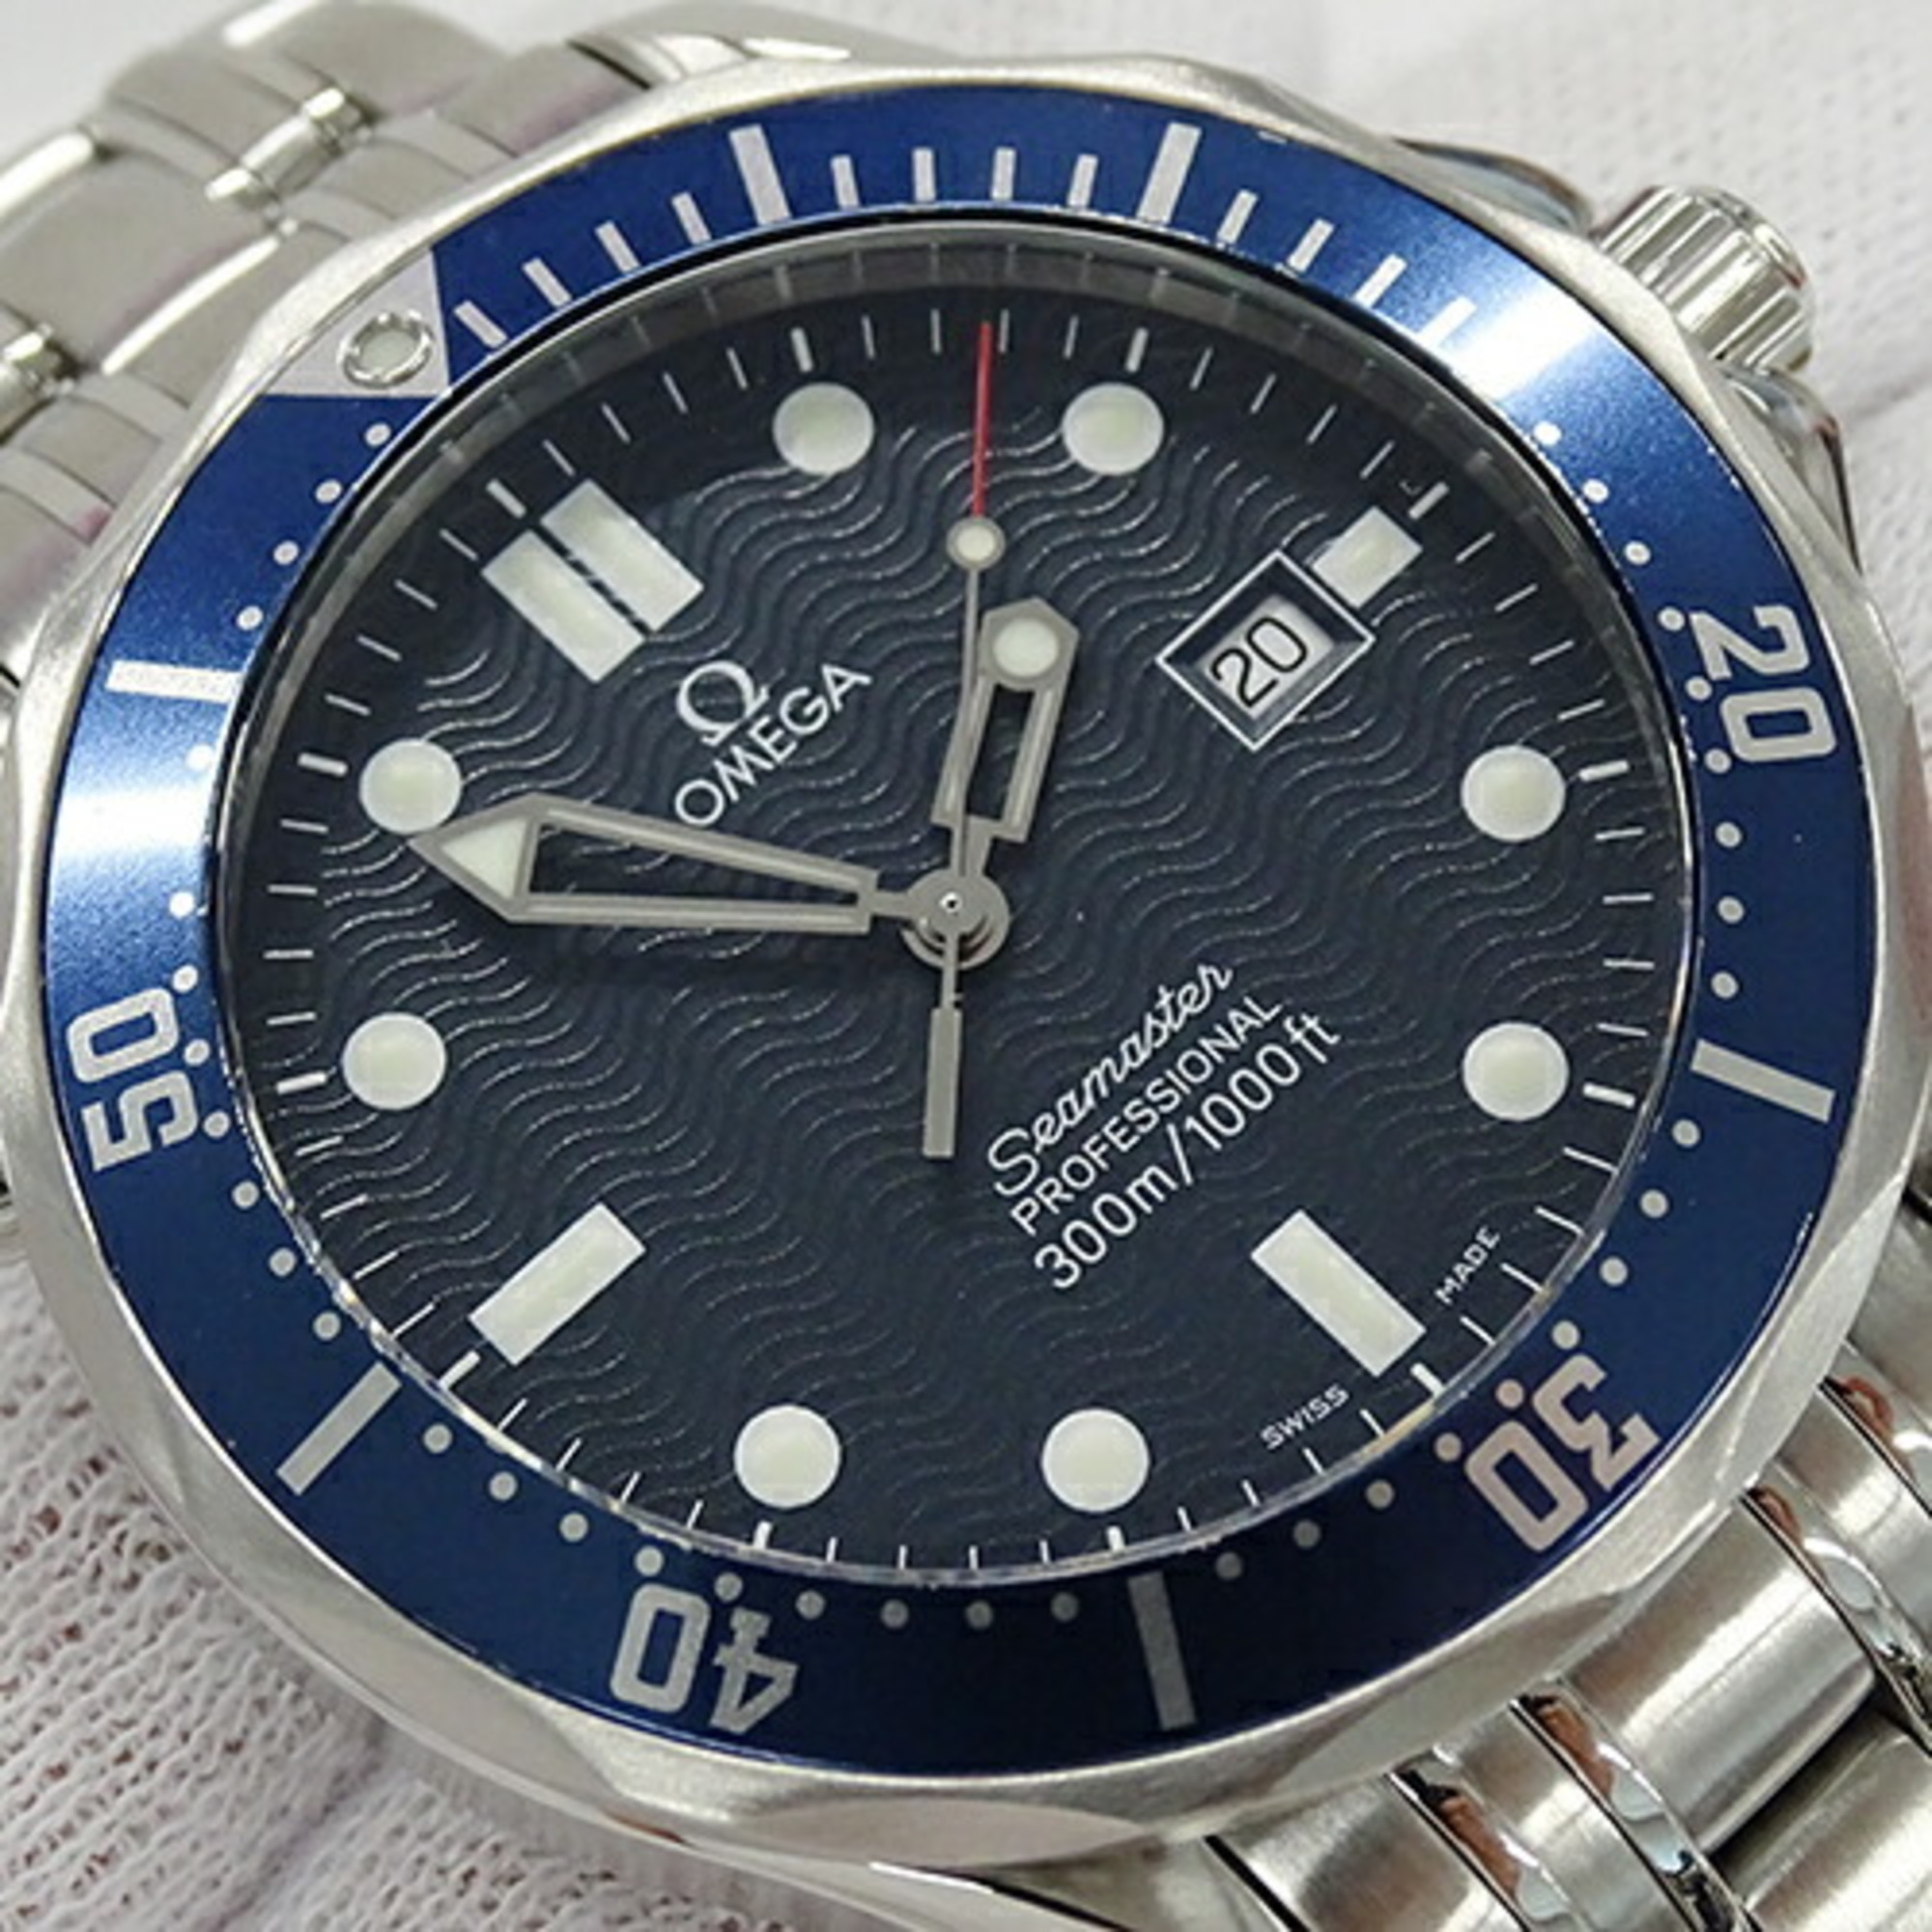 OMEGA Seamaster 2541.80 Men's Watch 300m Professional Date Quartz Stainless Steel SS Silver Blue Polished